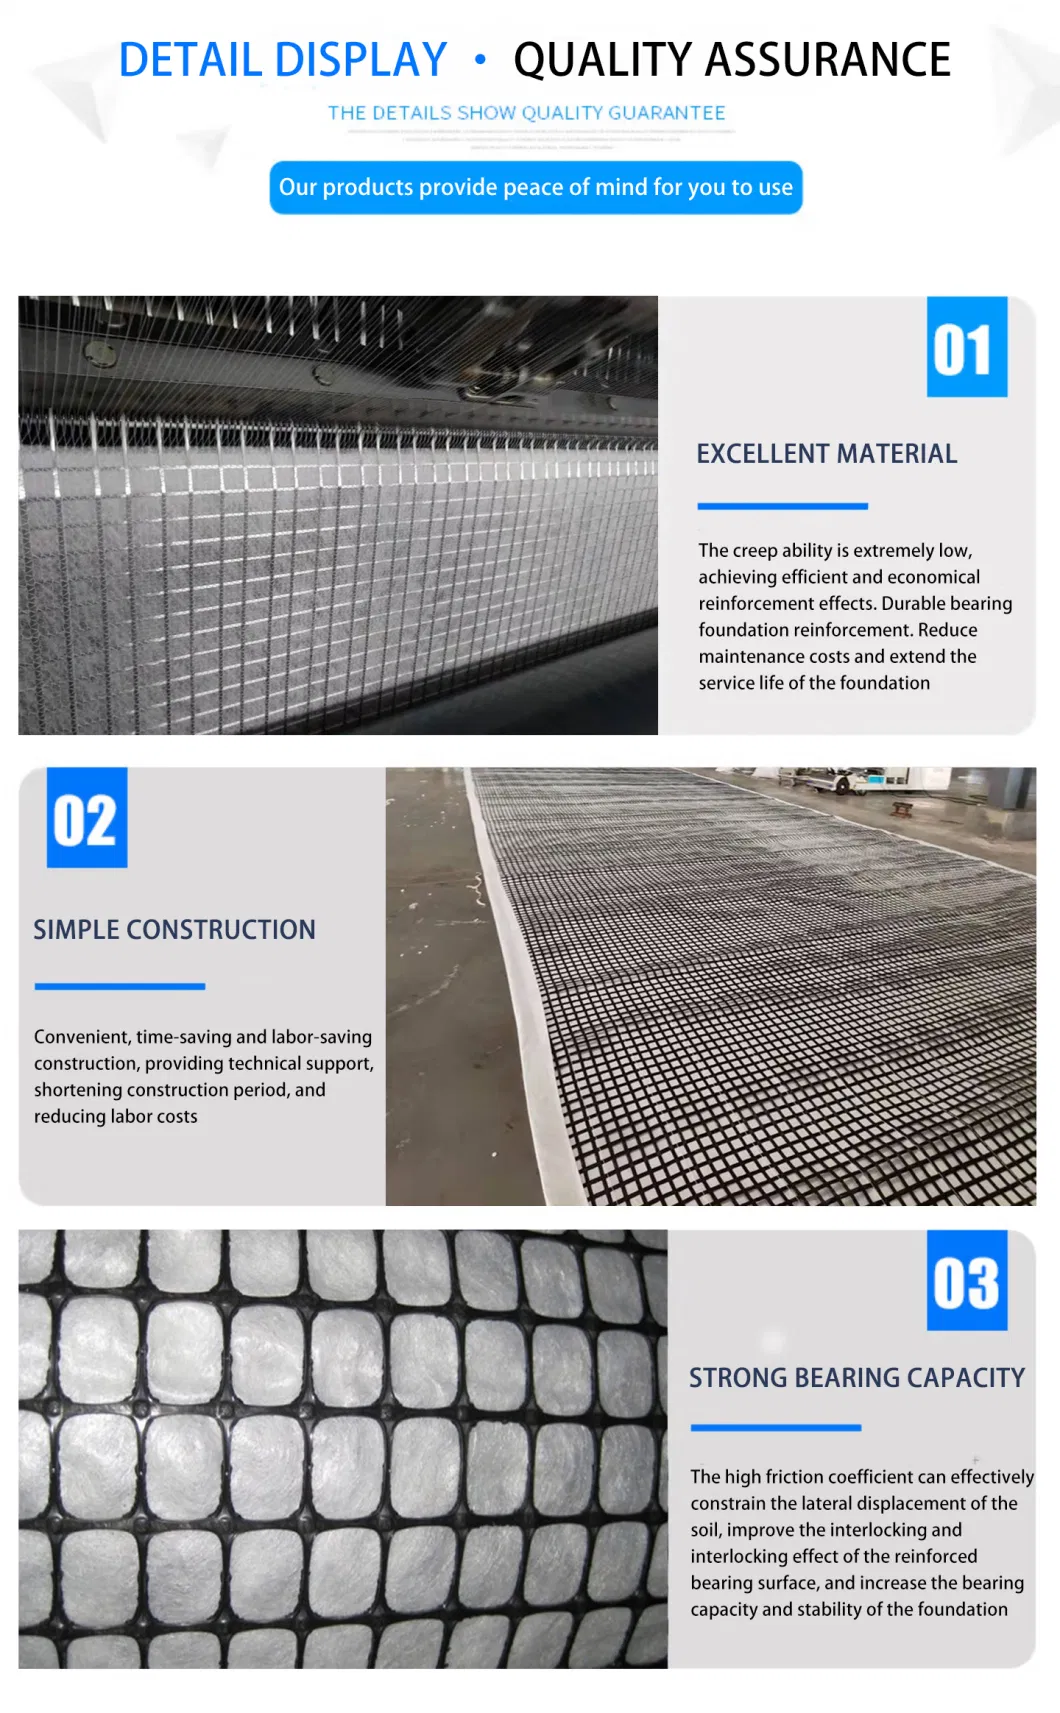 Fiberglass Geogrid Composite with Nonwoven Geotextile Used Soil Reinforcement and Stabilization Sell